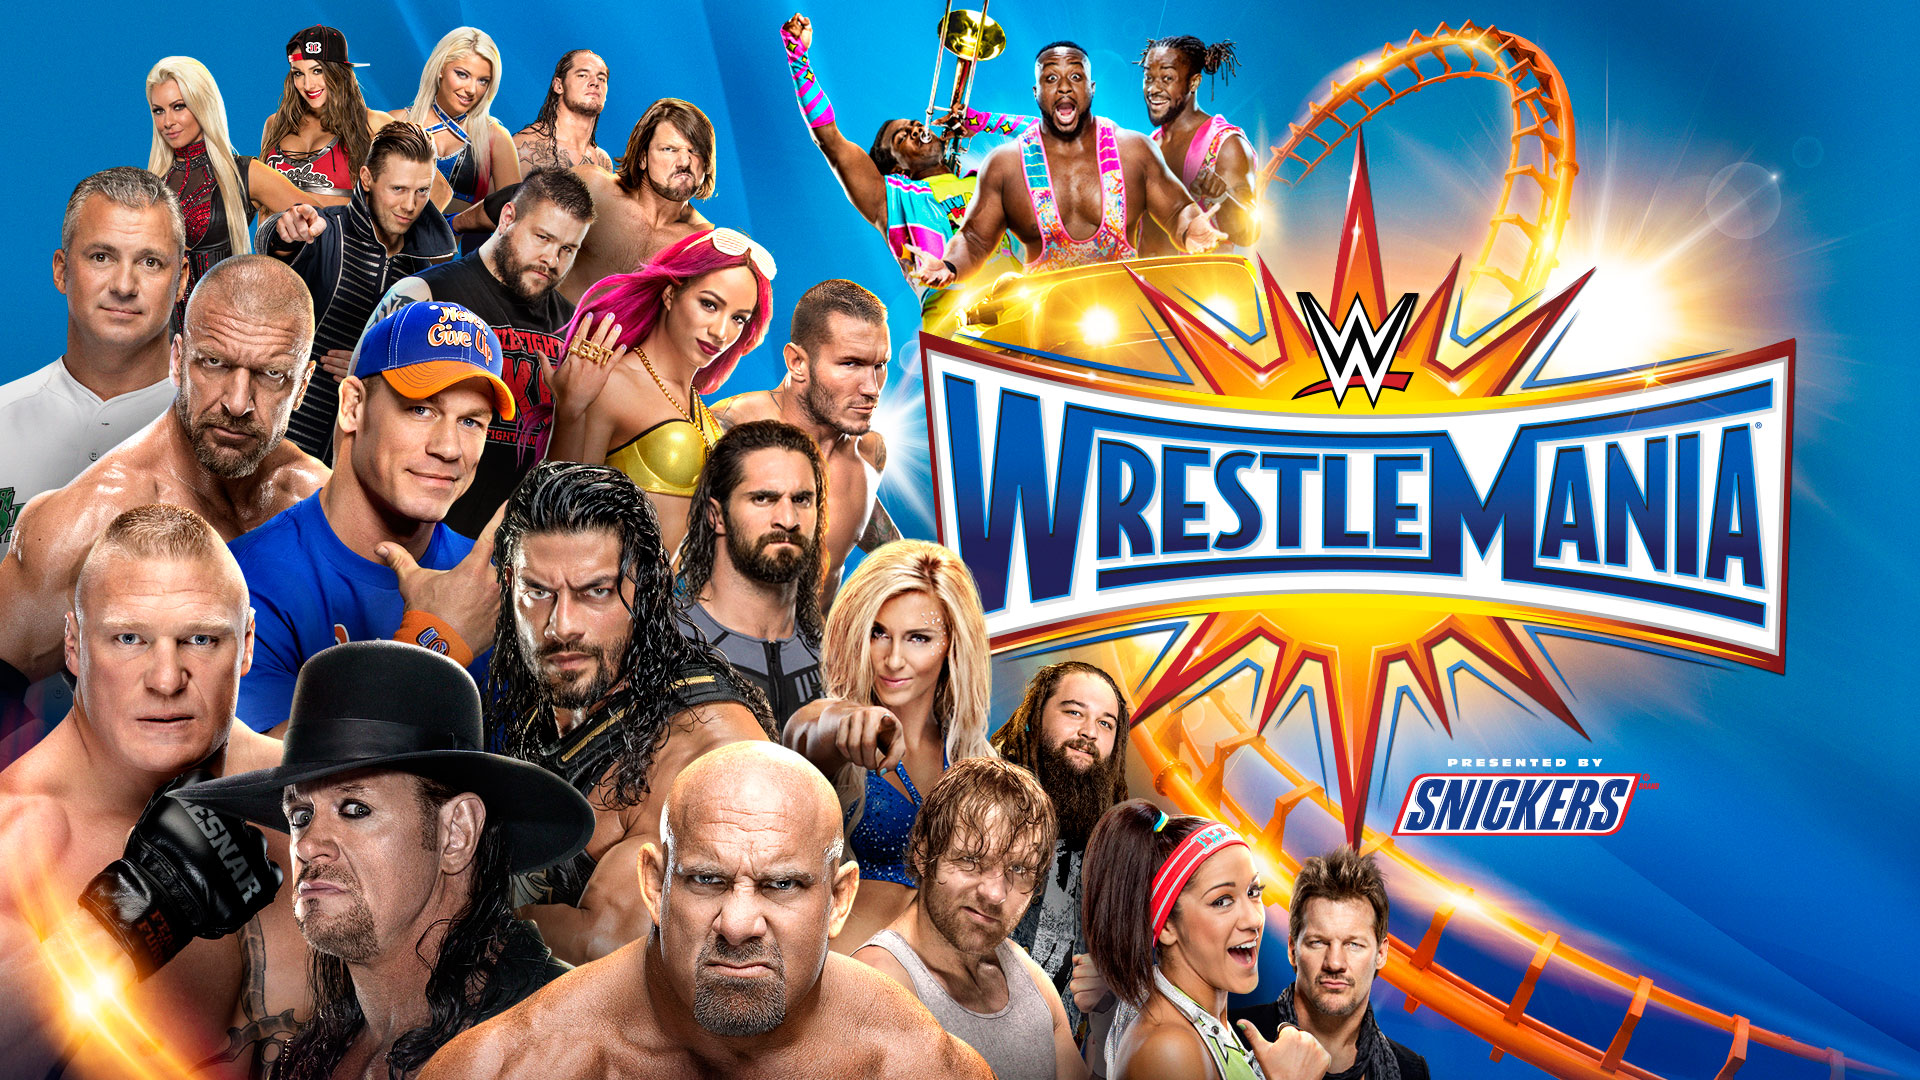 WRESTLEMANIA 33 WEEKEND [Special Preview, Part 3]: The Eater of Worlds!